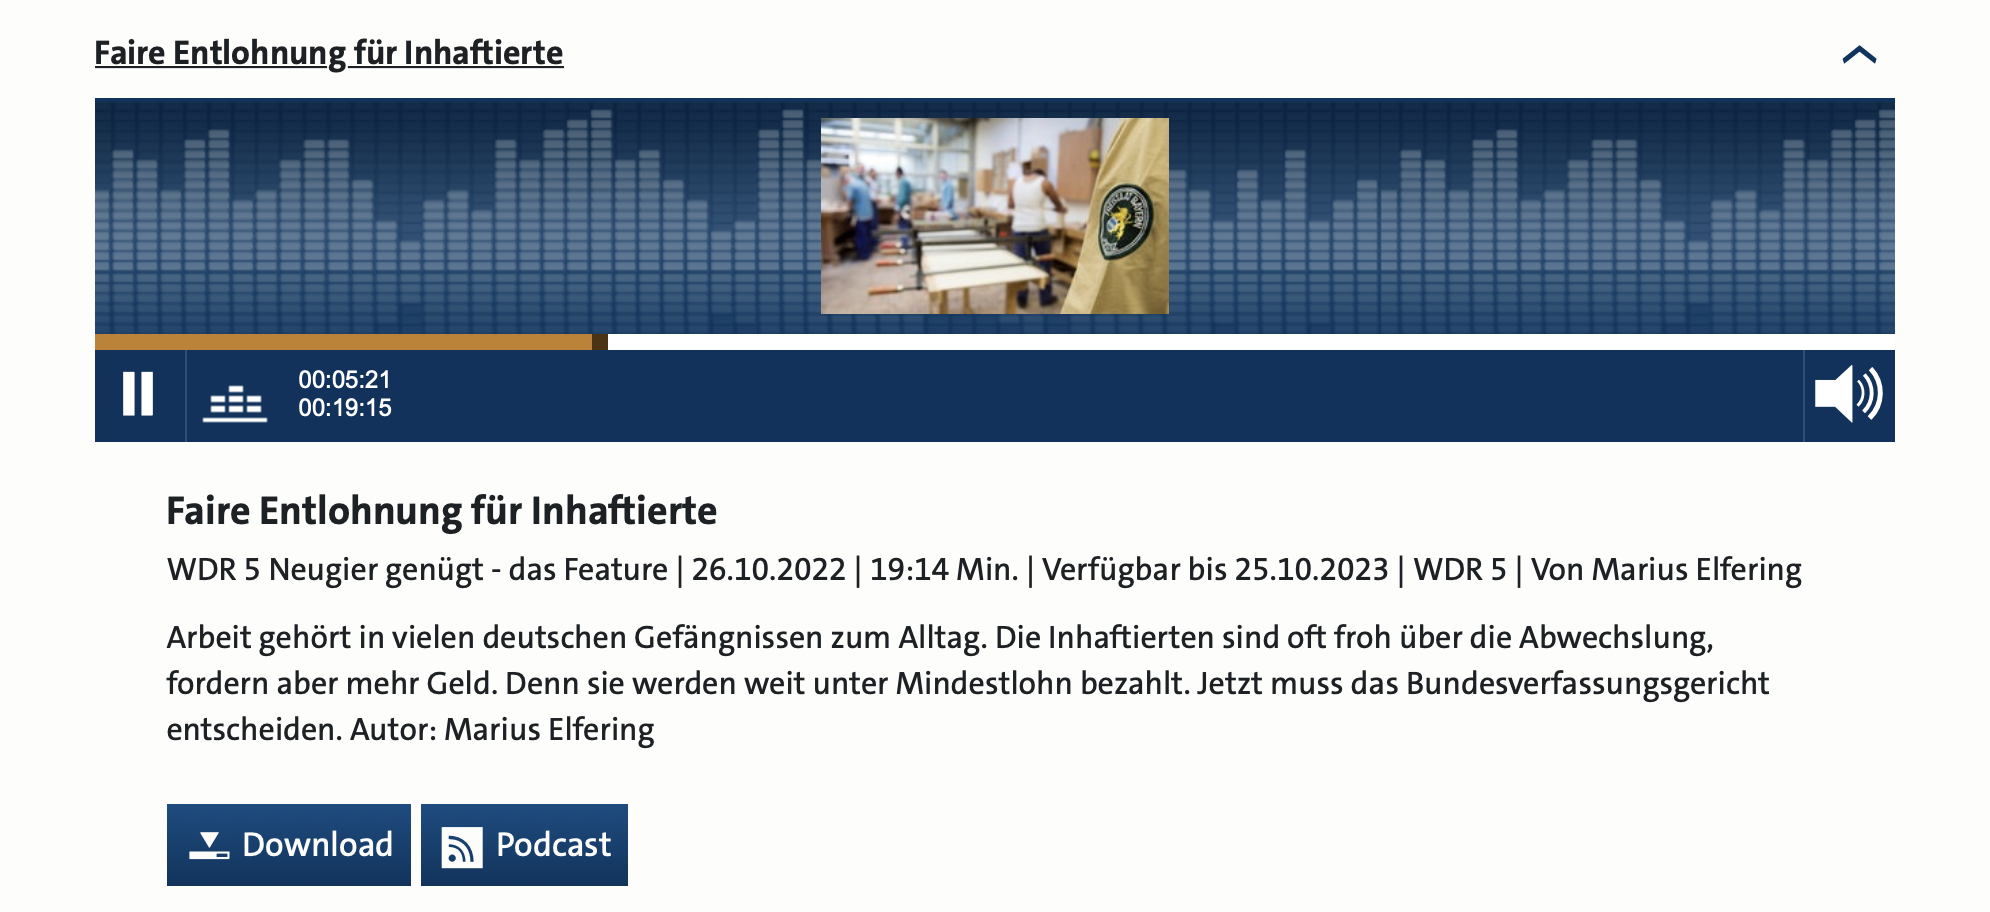 WDR 5 - Radiofeature vom 26.10.2022